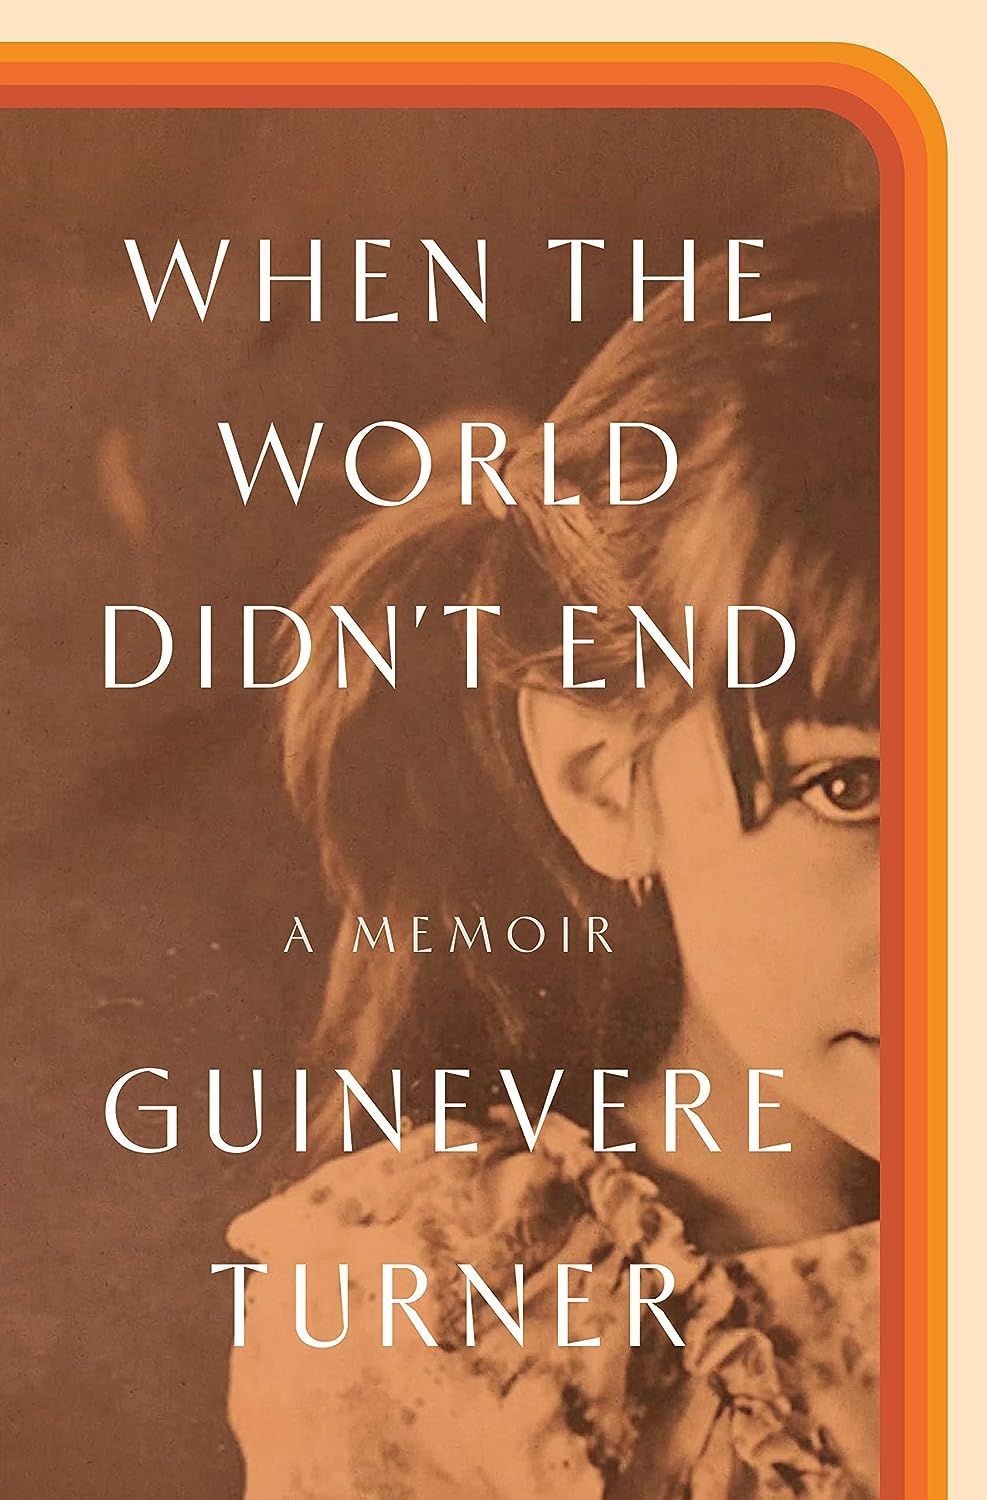 Jessie’s Girl: On Guinevere Turner’s “When the World Didn’t End”